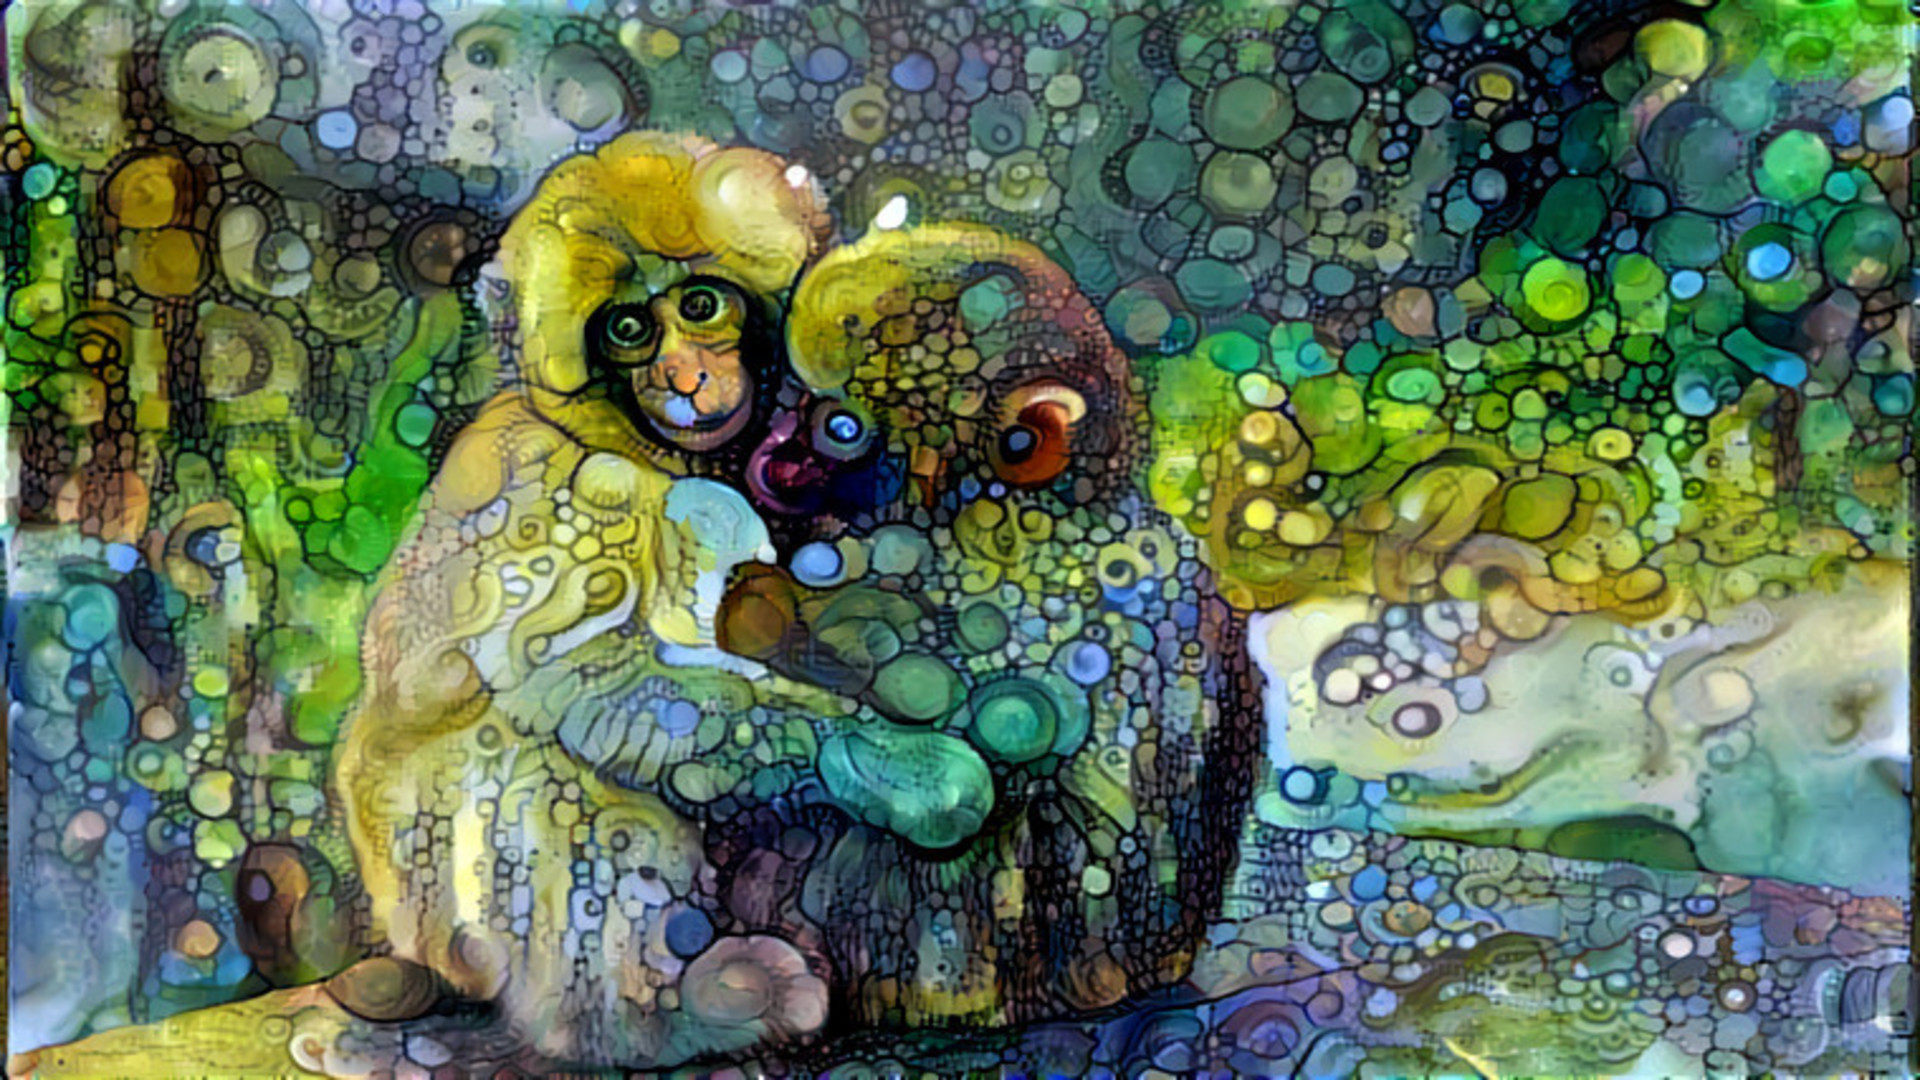 This is a creative piece of art which I created out of a simple chimpanzee image, hope u like it :) by NatureWorshiper